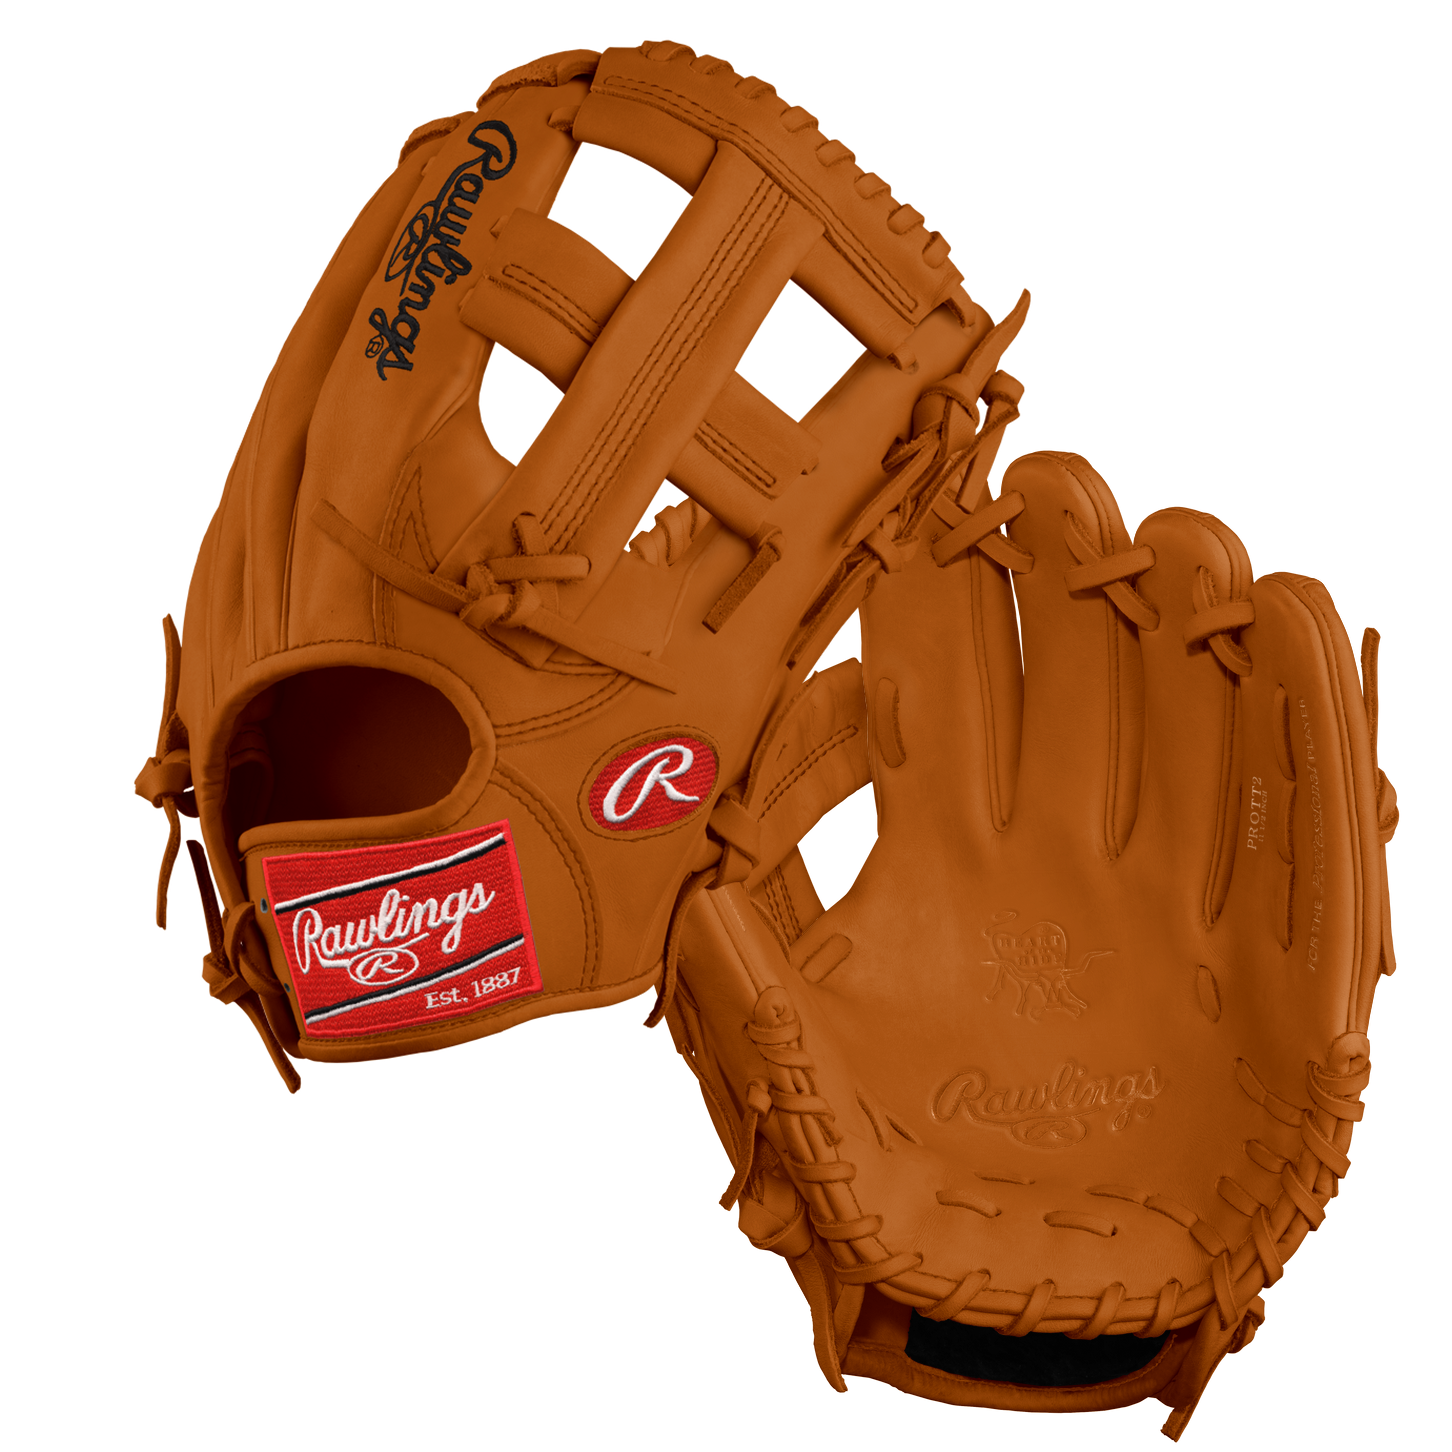          Pattern TT2 Sport Baseball Leather Heart of the Hide Fit Standard Throwing Hand Right-Hand Throw Position Infield  Size 11 1/2 Web Single Post w/ X Lace Color Tan Logo Patch White on Scarlet Leather Tan Tan Laces Lining Tan Welting Palm Tan Welting Back Tan Binding Tan Tan Stitching Stamping Indent No Palm Pad Wrist Lining Thermo Formed Break-In Standard       